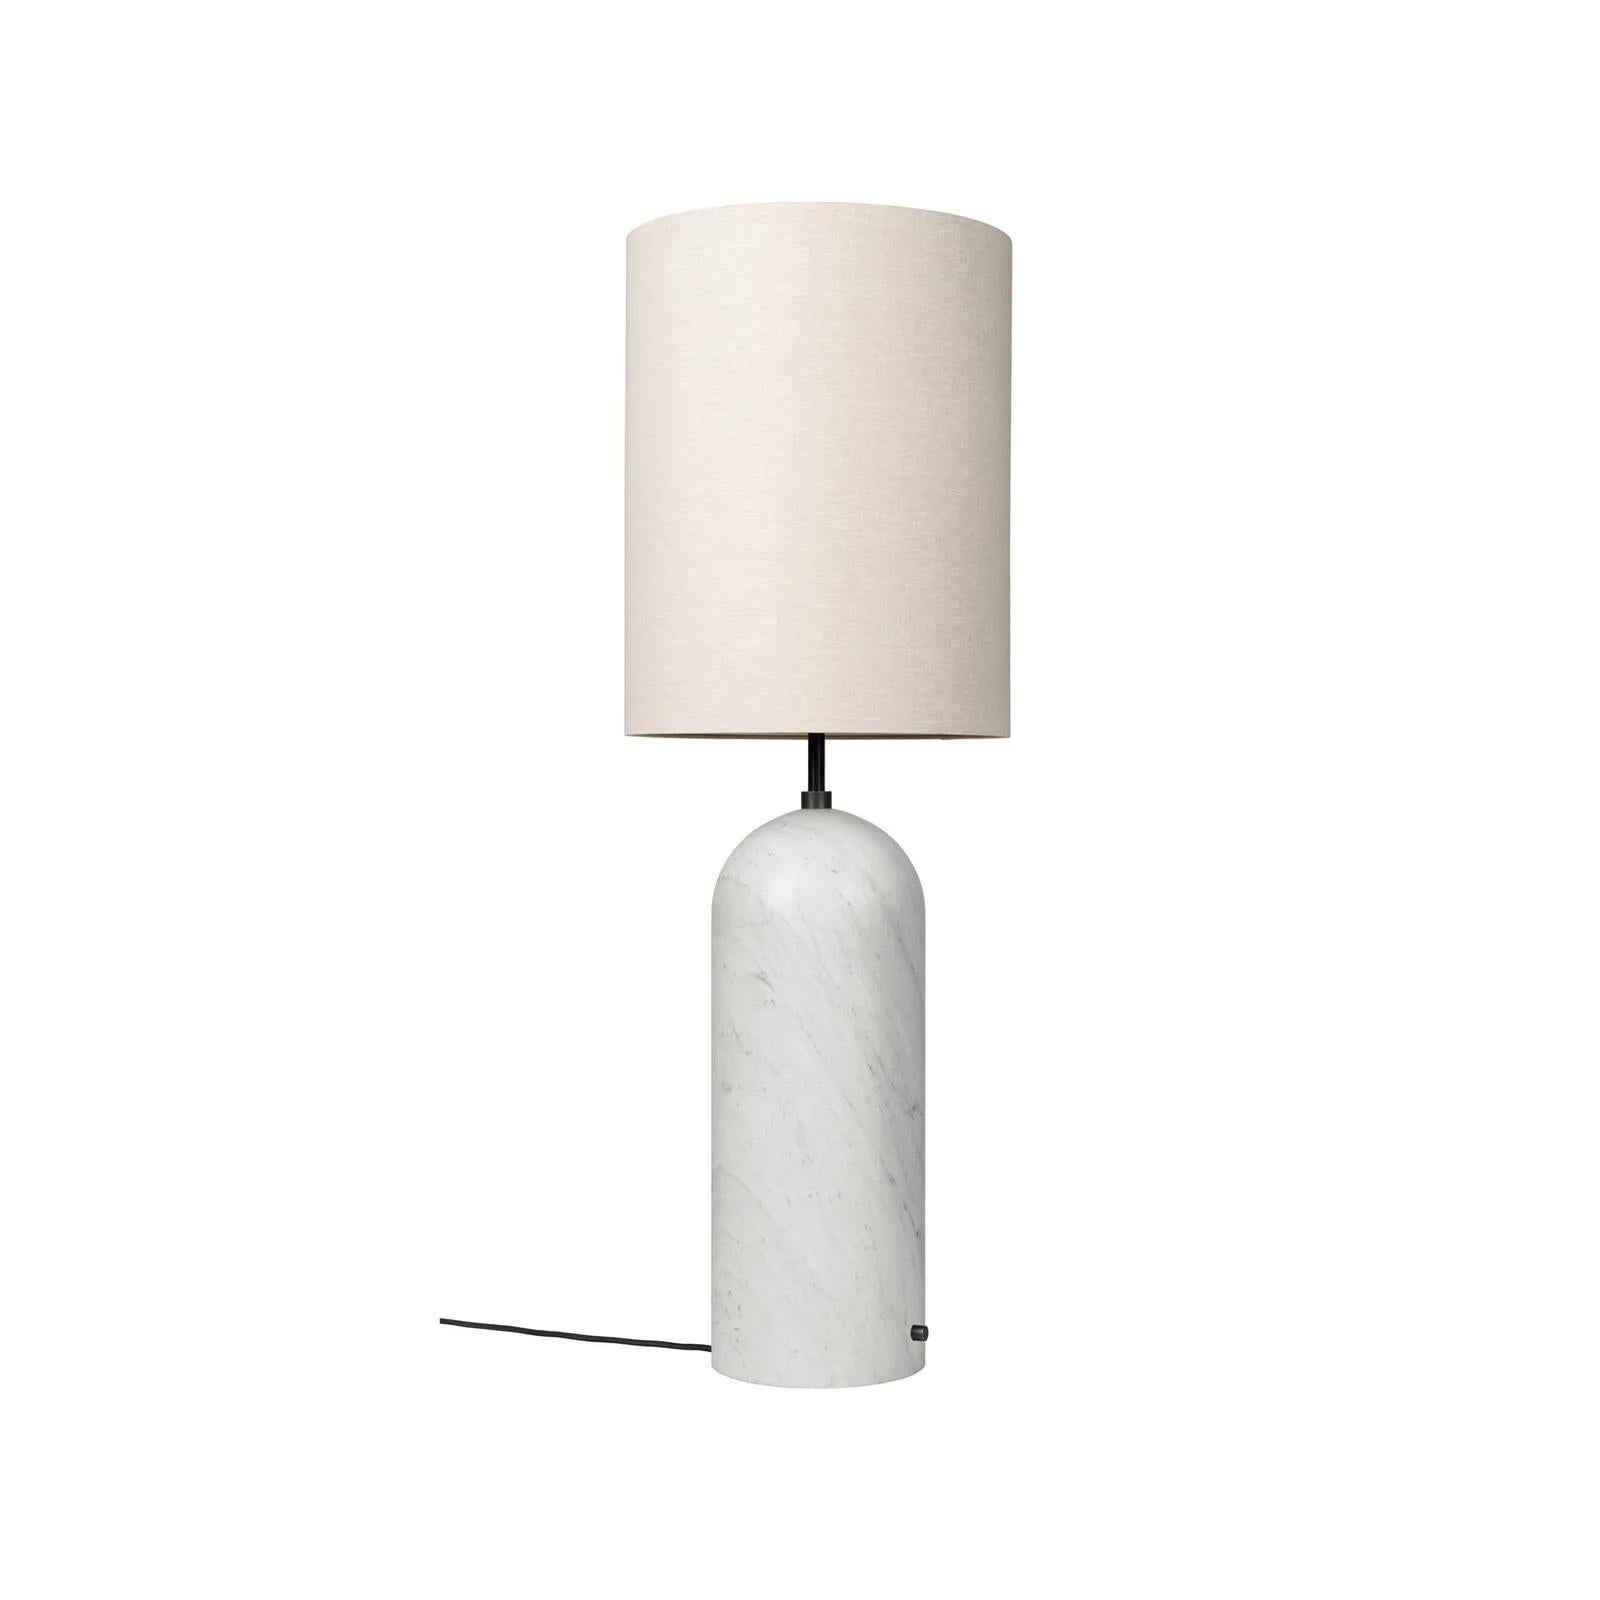 Powder-Coated Gravity Floor Lamp - XL High, White Marble, White For Sale